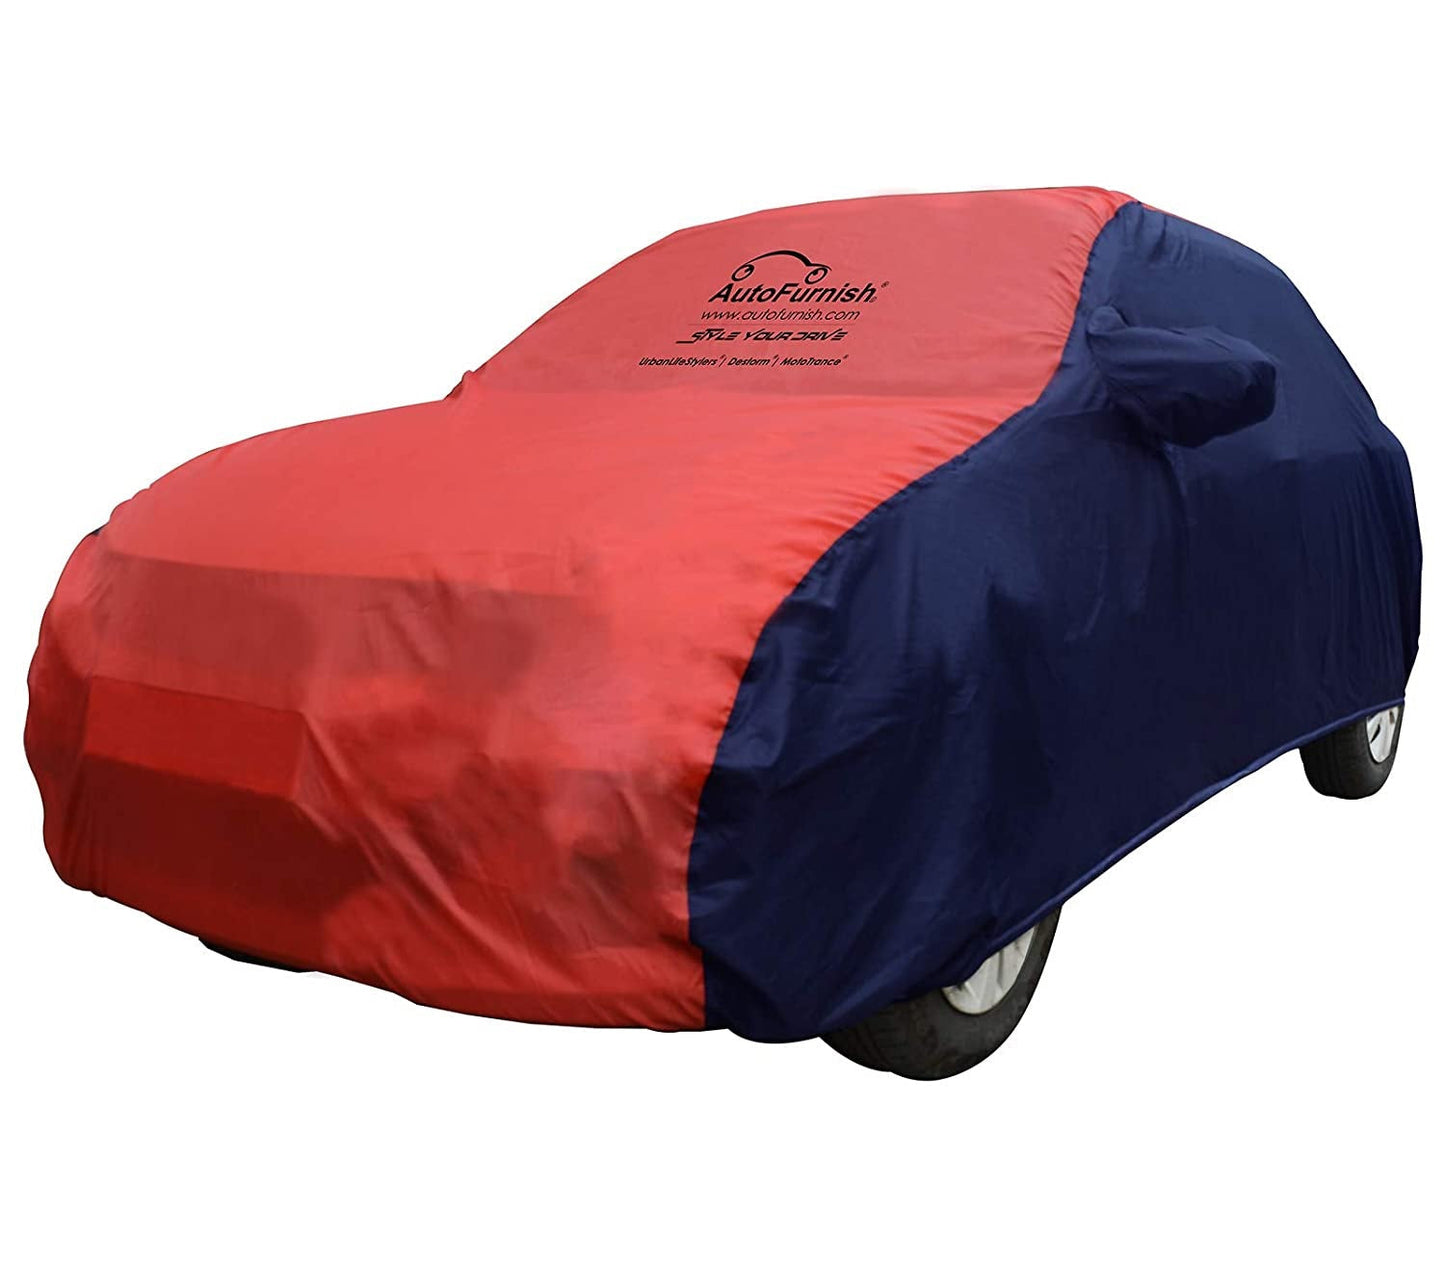 MG Astor (2021) Car Body Cover, Triple Stitched, Heat & Water Resistant with Side Mirror Pockets (SPORTY Series)